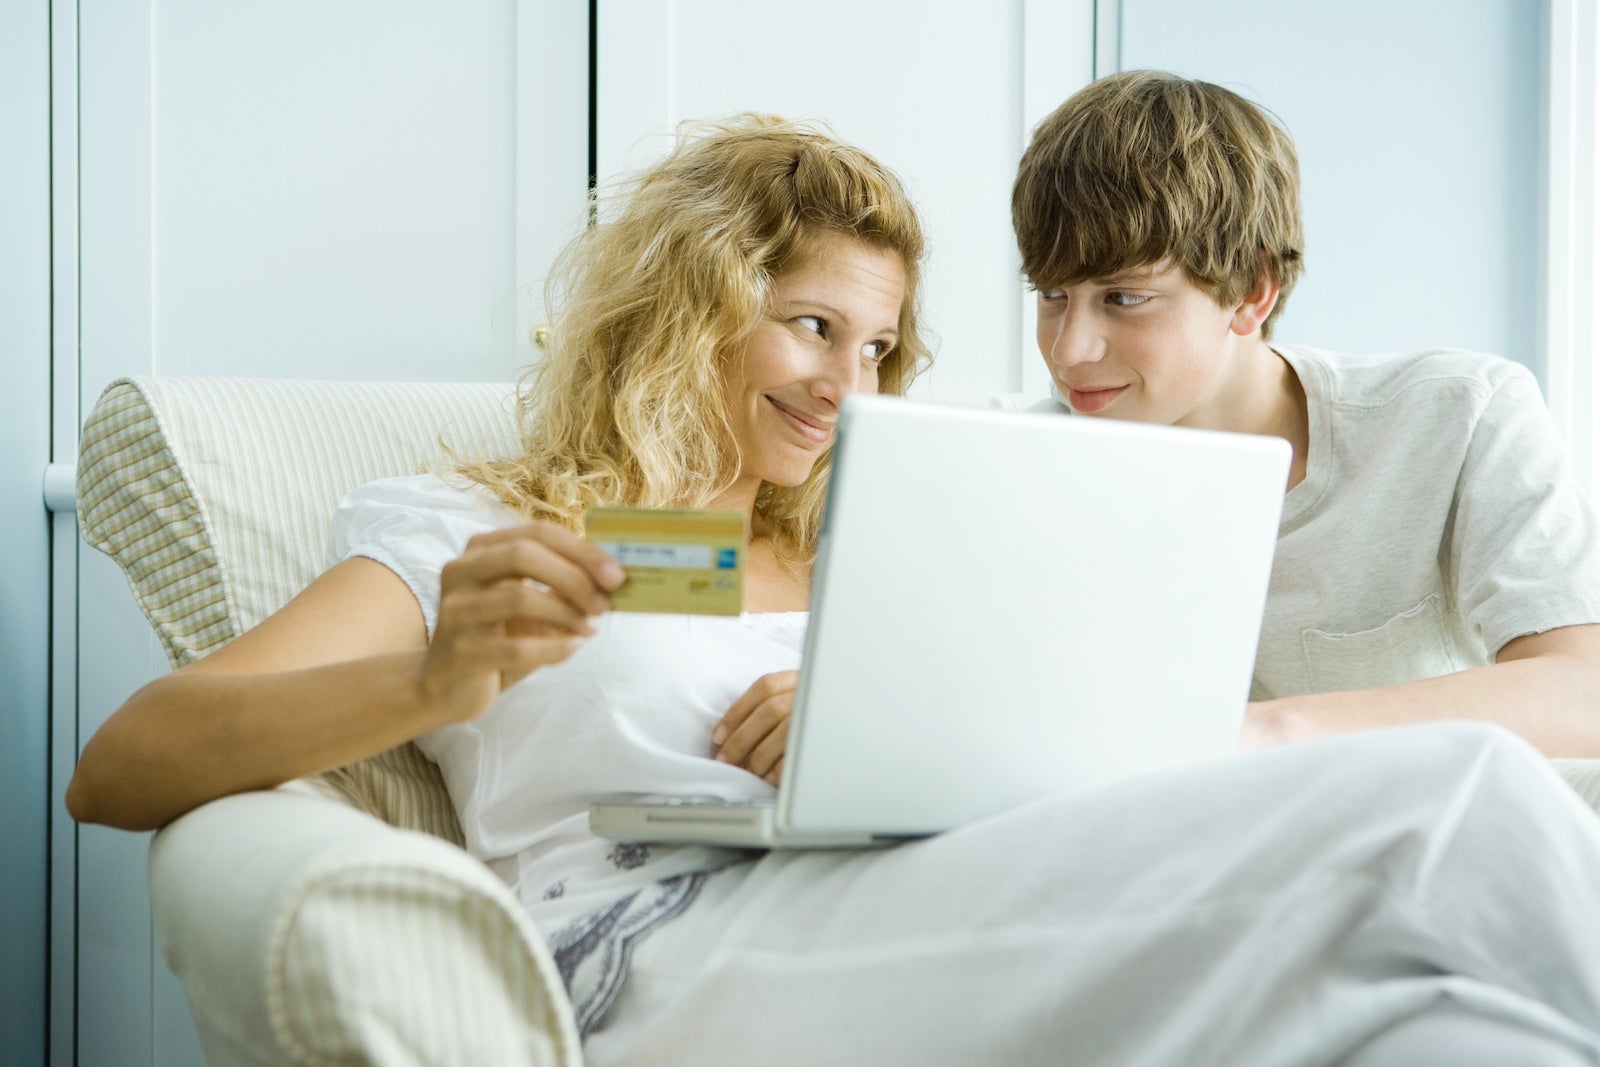 A mother and son look at the computer while holding a credit card